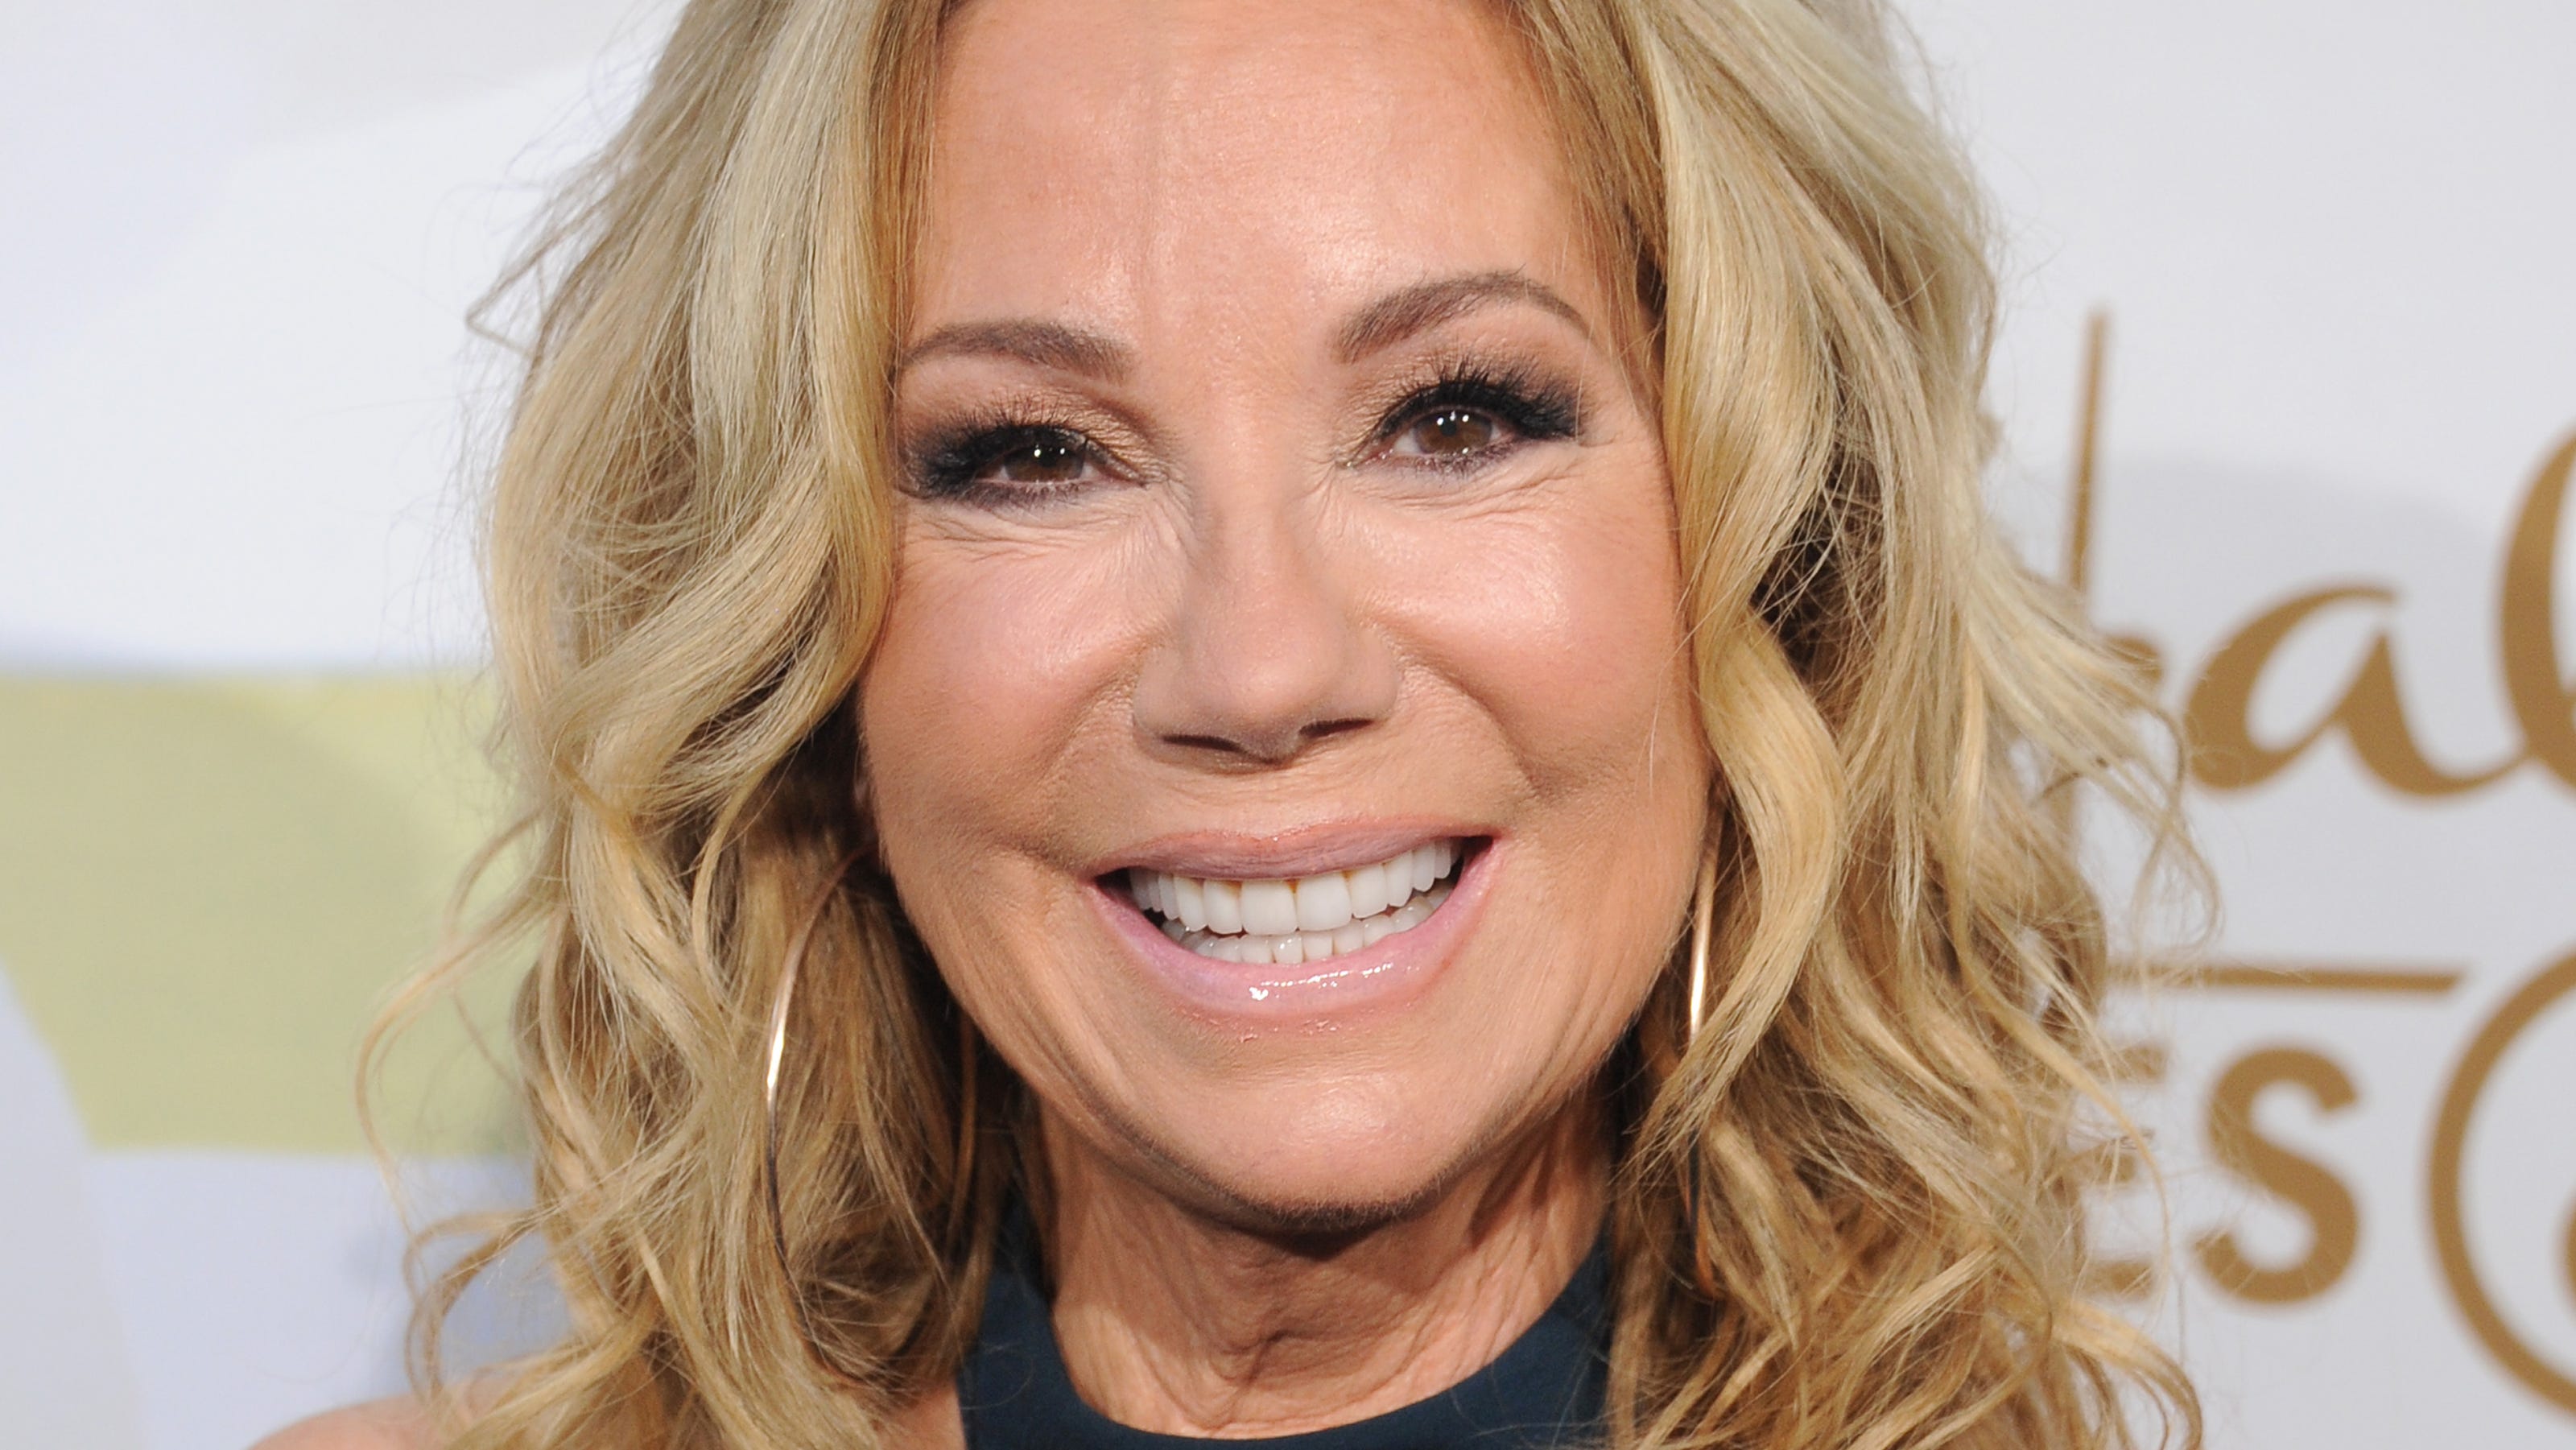 Kathie Lee Gifford and Takl: What the ex-'Today' host is up to in Tenn.